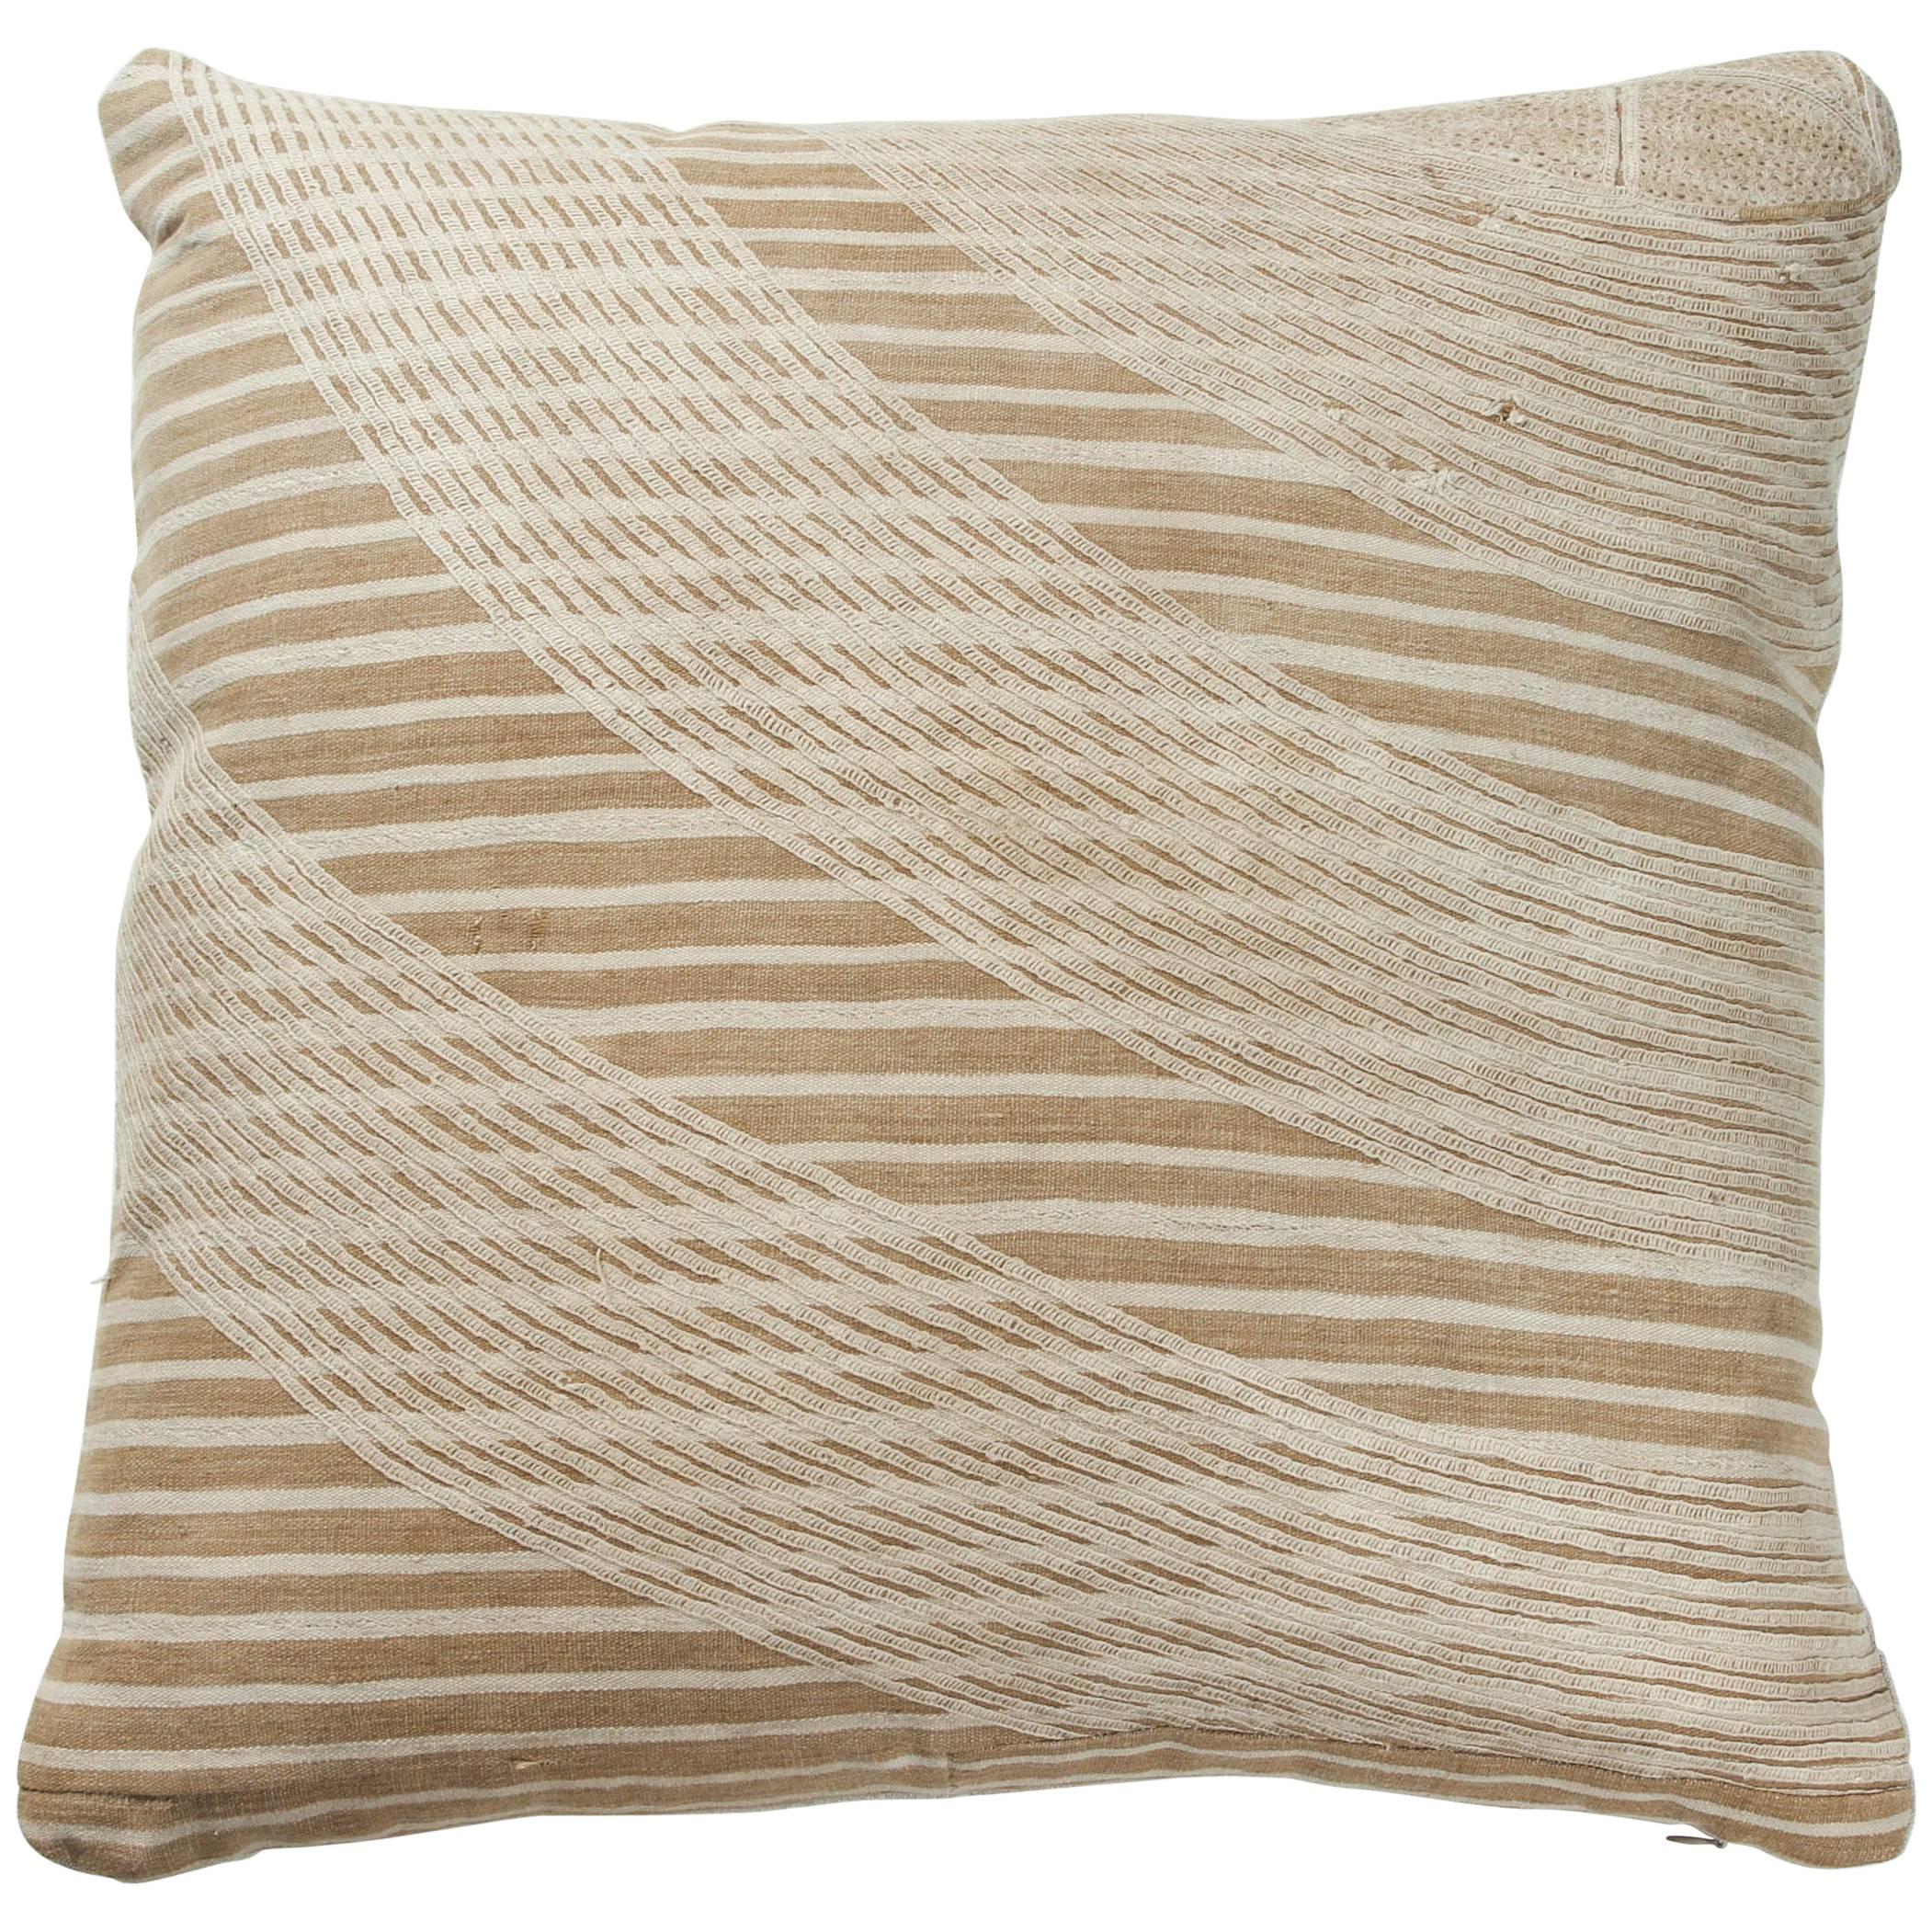 African Embroidery Pillow in Ivory and Oatmeal Color